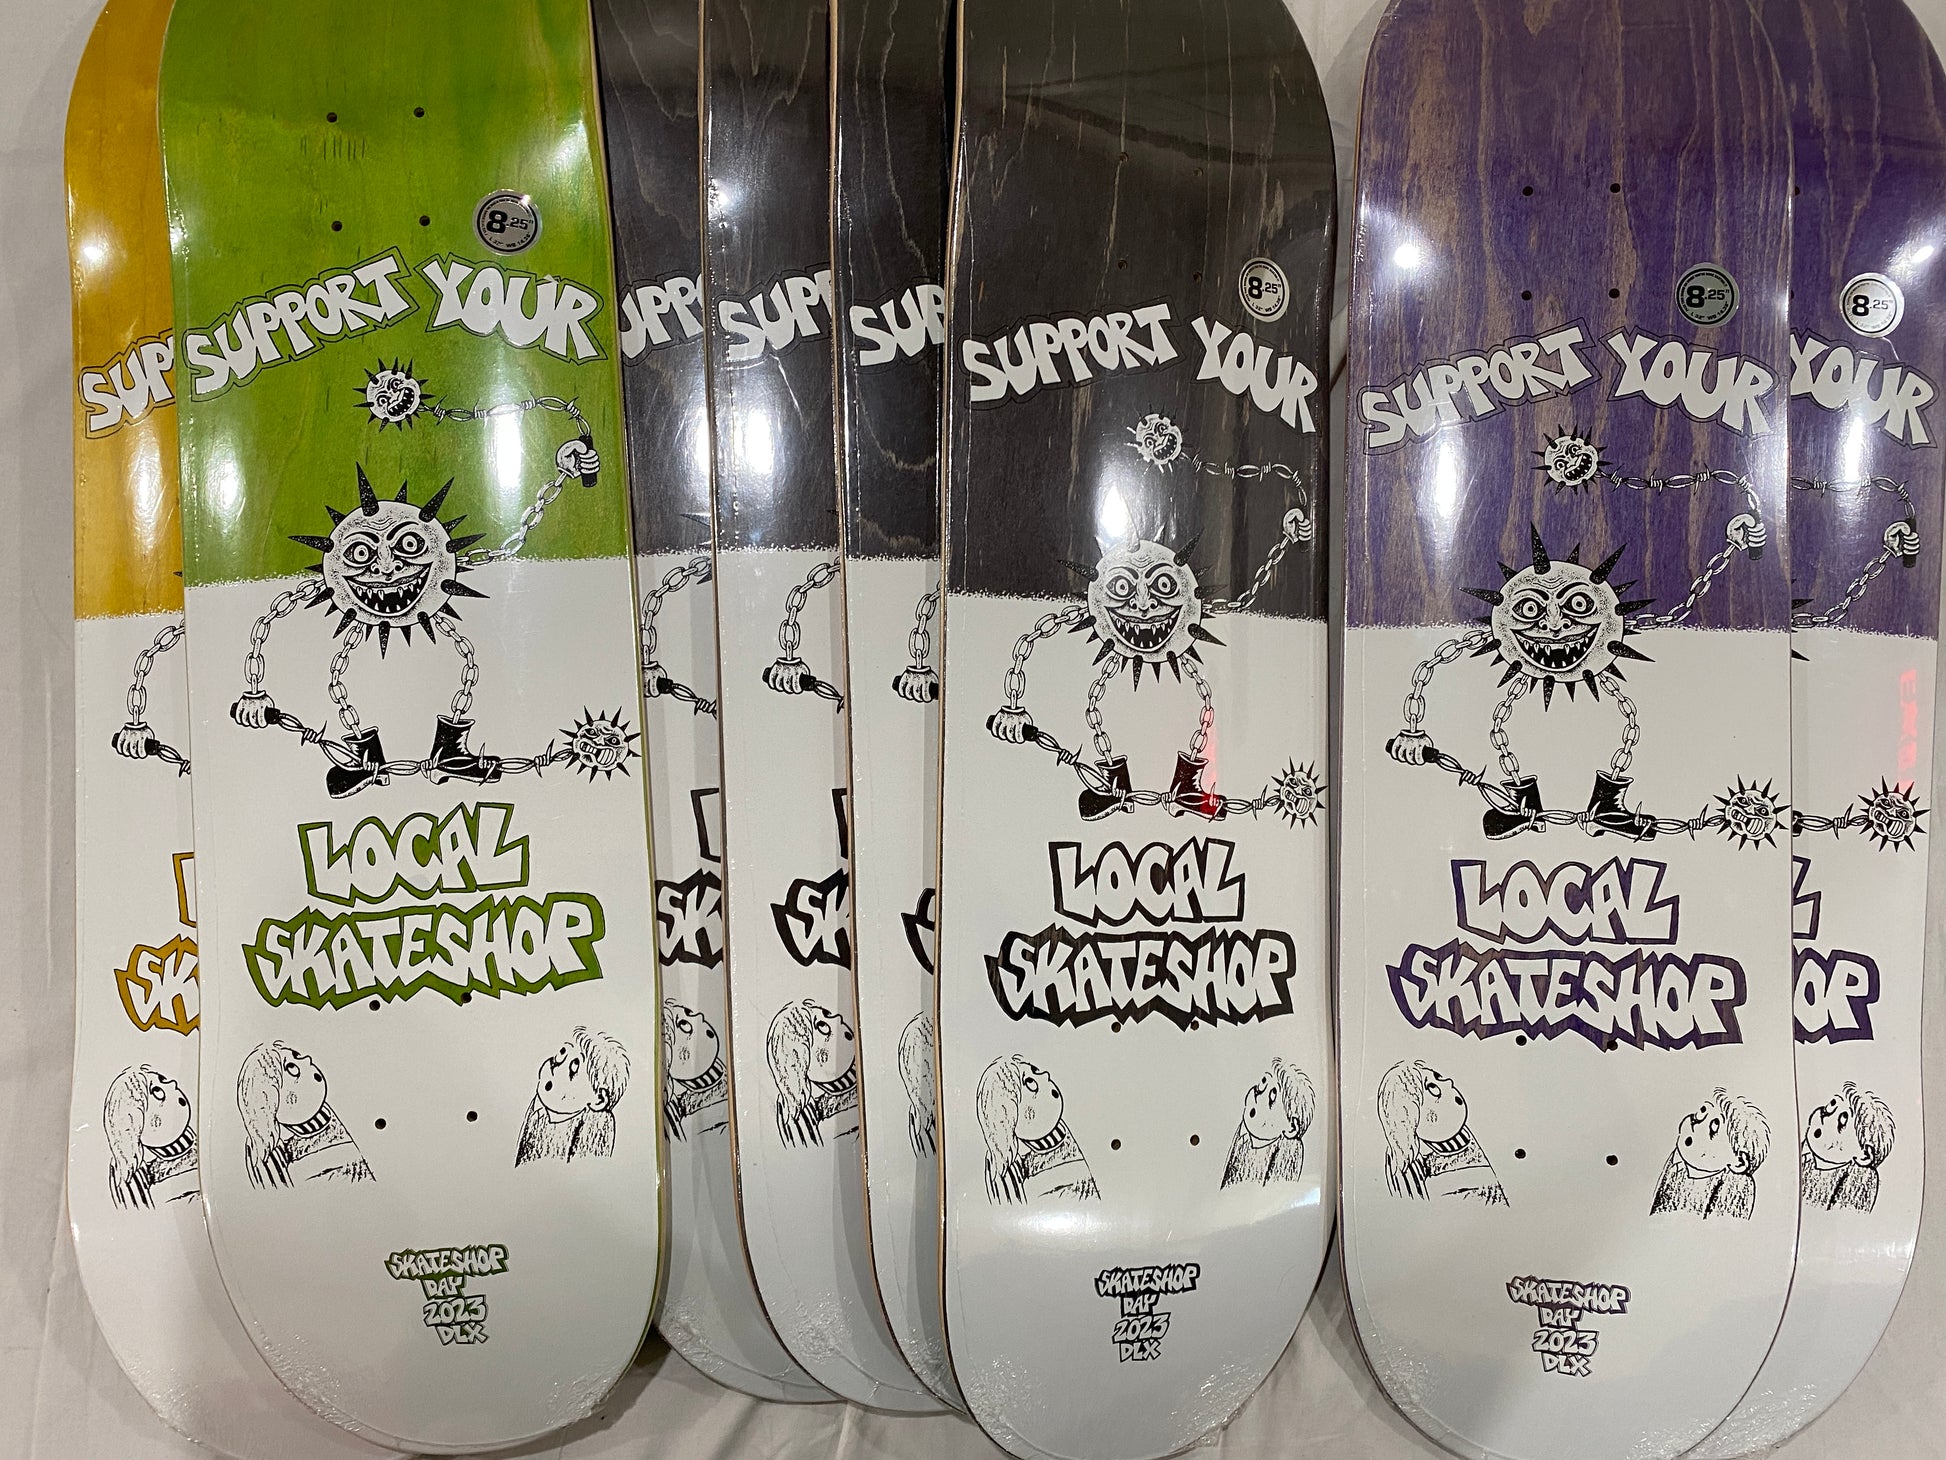 Deluxe Support Your Local Skateshop Skateboard Deck 8.06 - Blue/Green